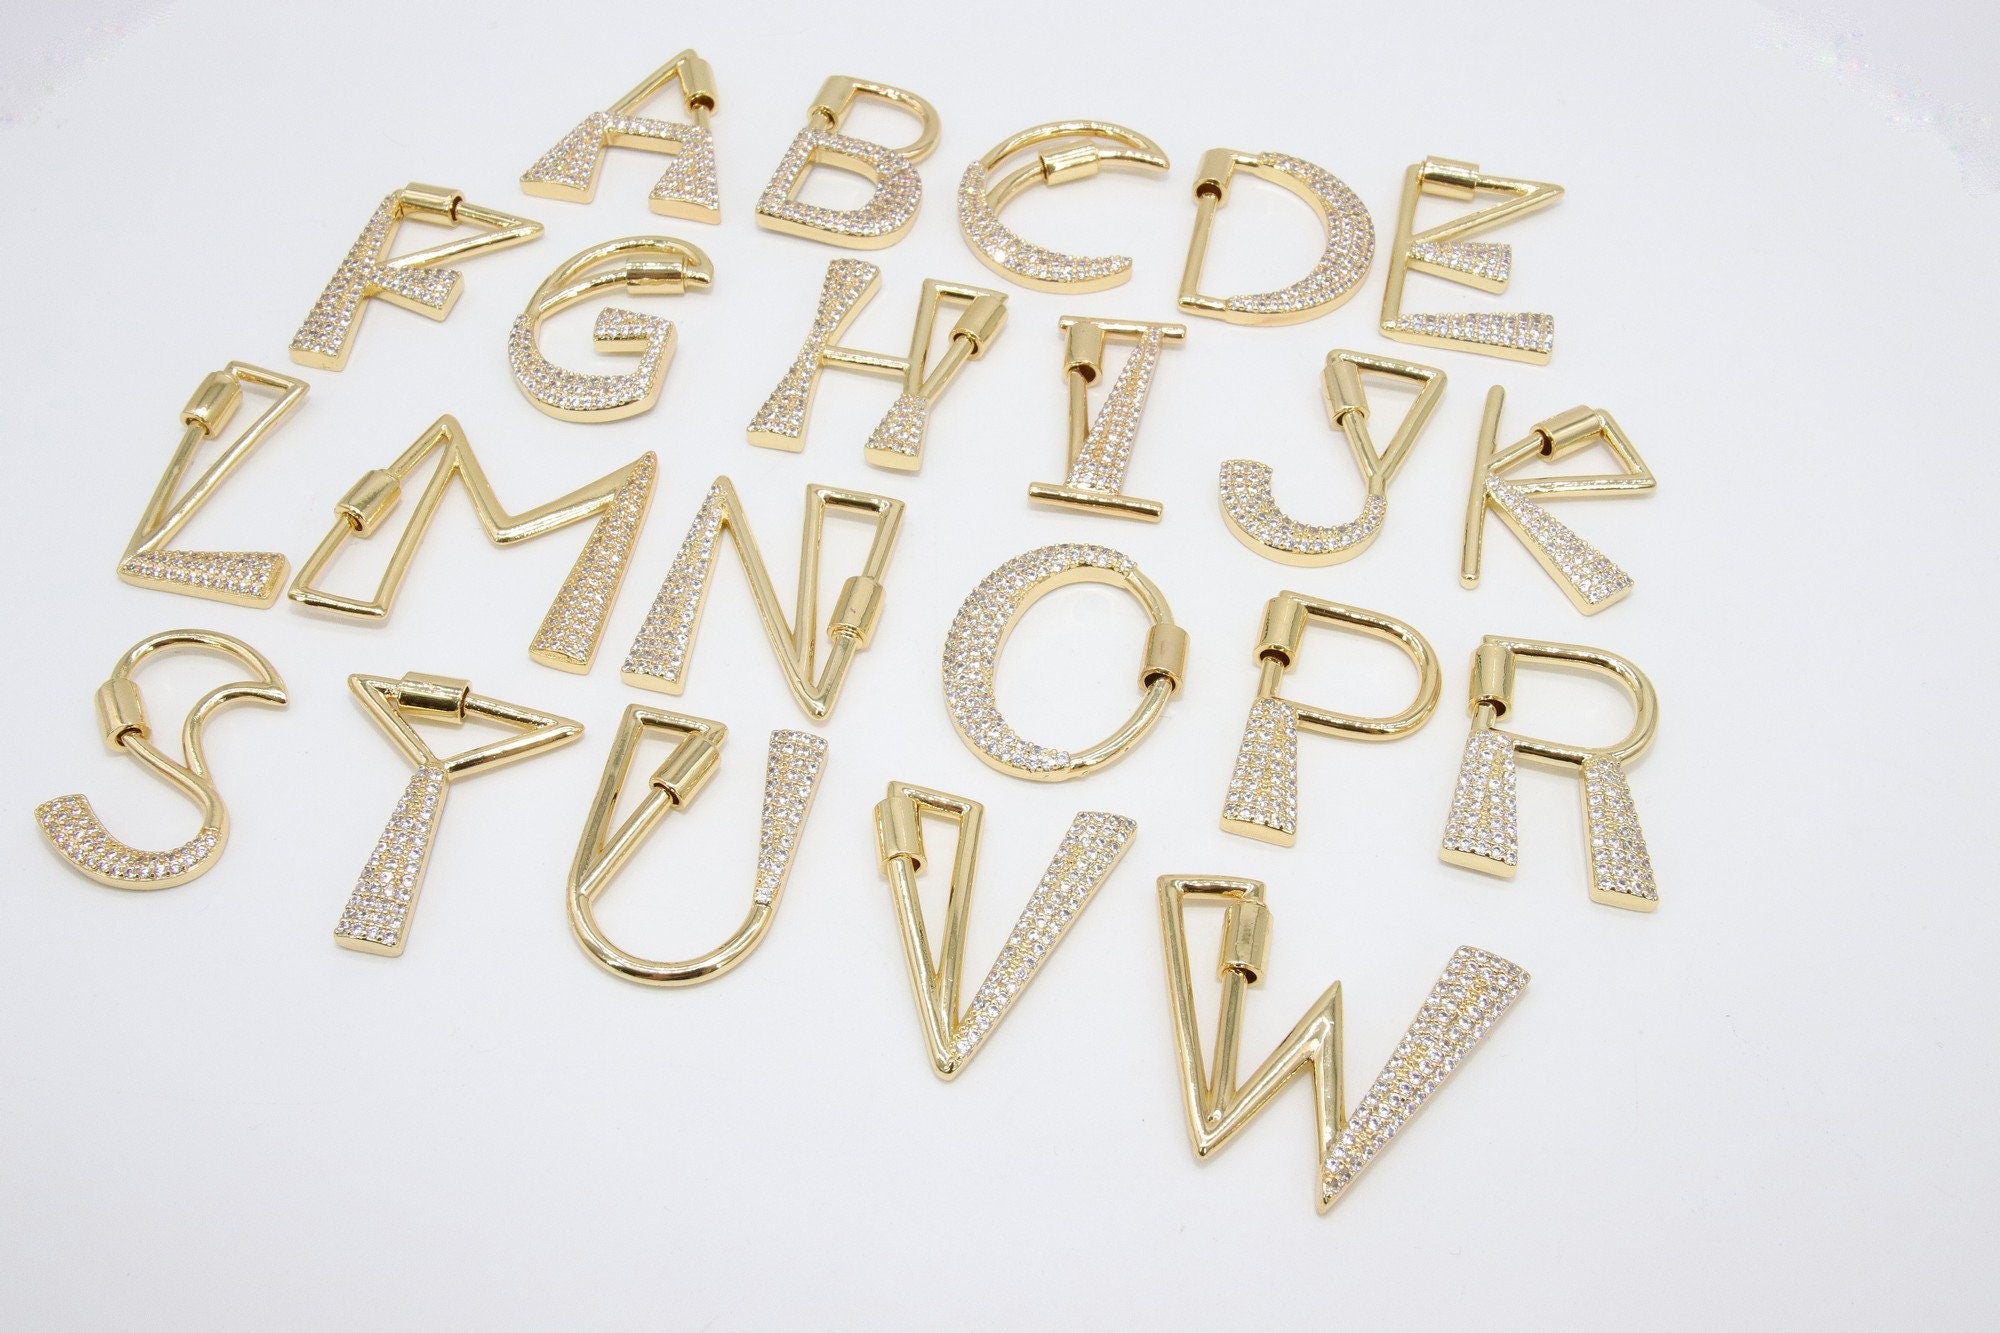 CZ Micro Pave Letter Screw Clasps, Large Gold Connector Links, Jewelry Carabiner Letters for Necklace #2603, Personalized Alphabet